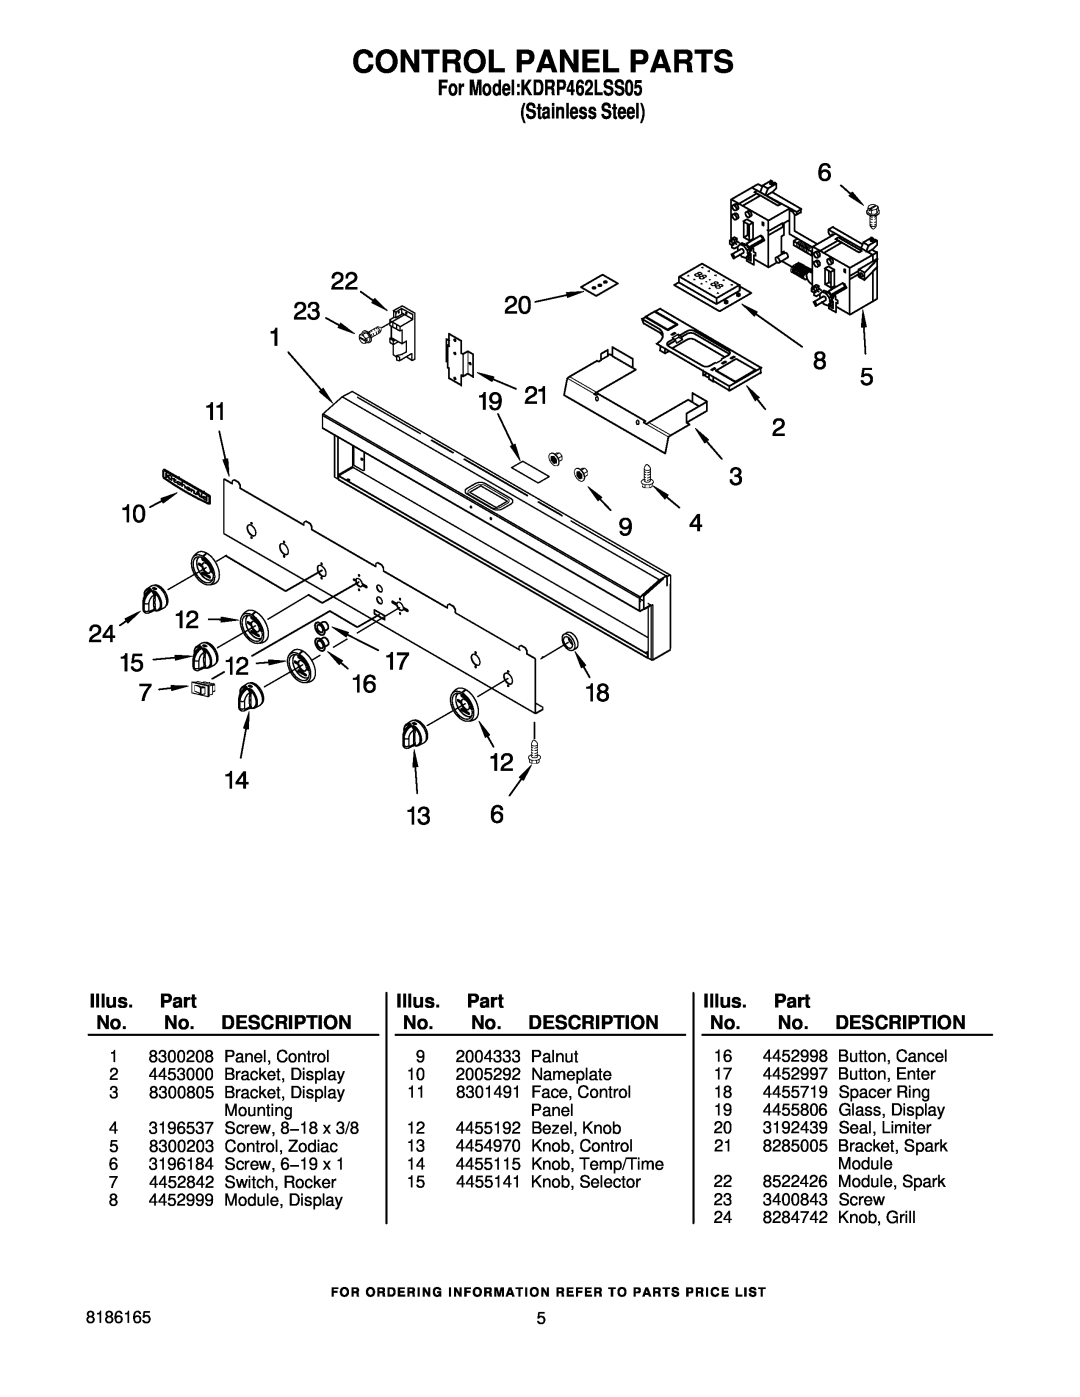 KitchenAid manual Control Panel Parts, For ModelKDRP462LSS05 Stainless Steel, Illus. Part No. No. DESCRIPTION 